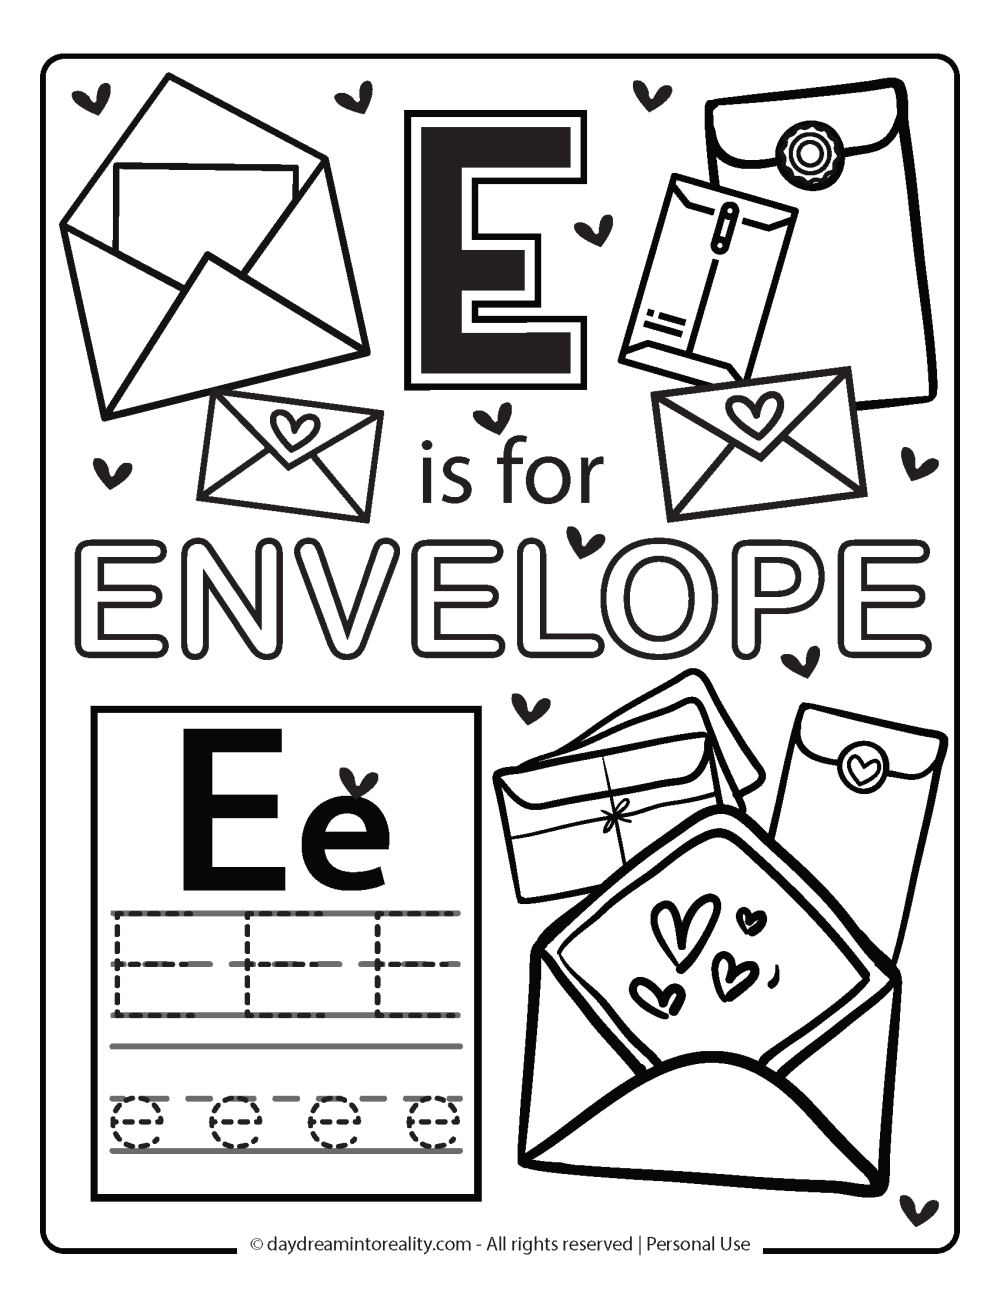 Letter E coloring page worksheet free printables. E is for envelope.